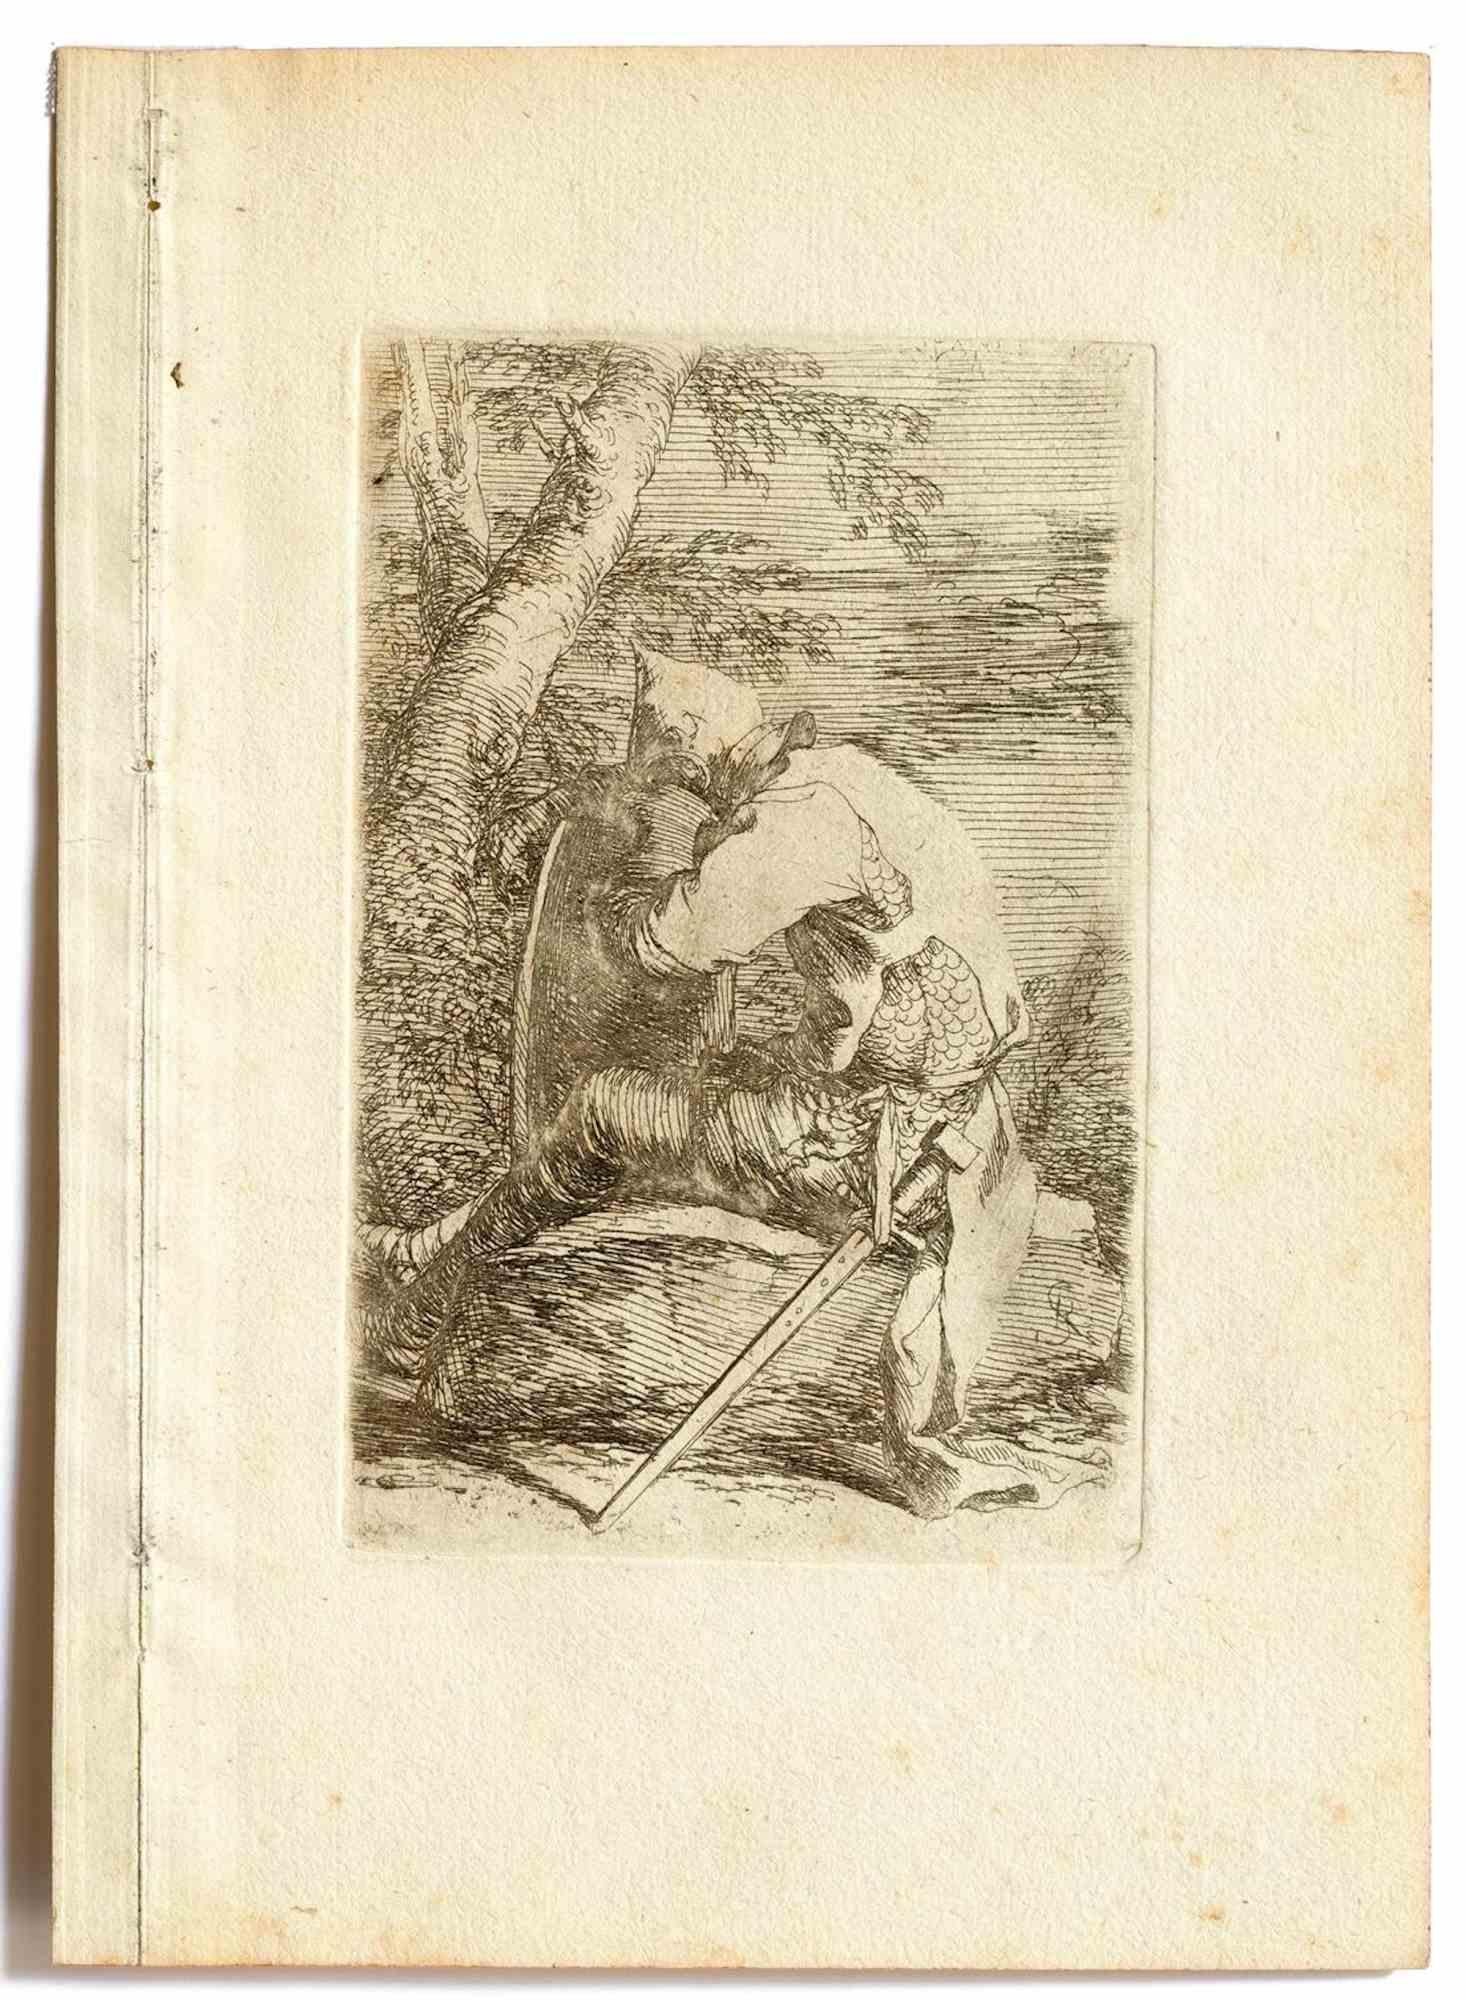 Unknown Figurative Print - Soldier -  Etching - 17th Century